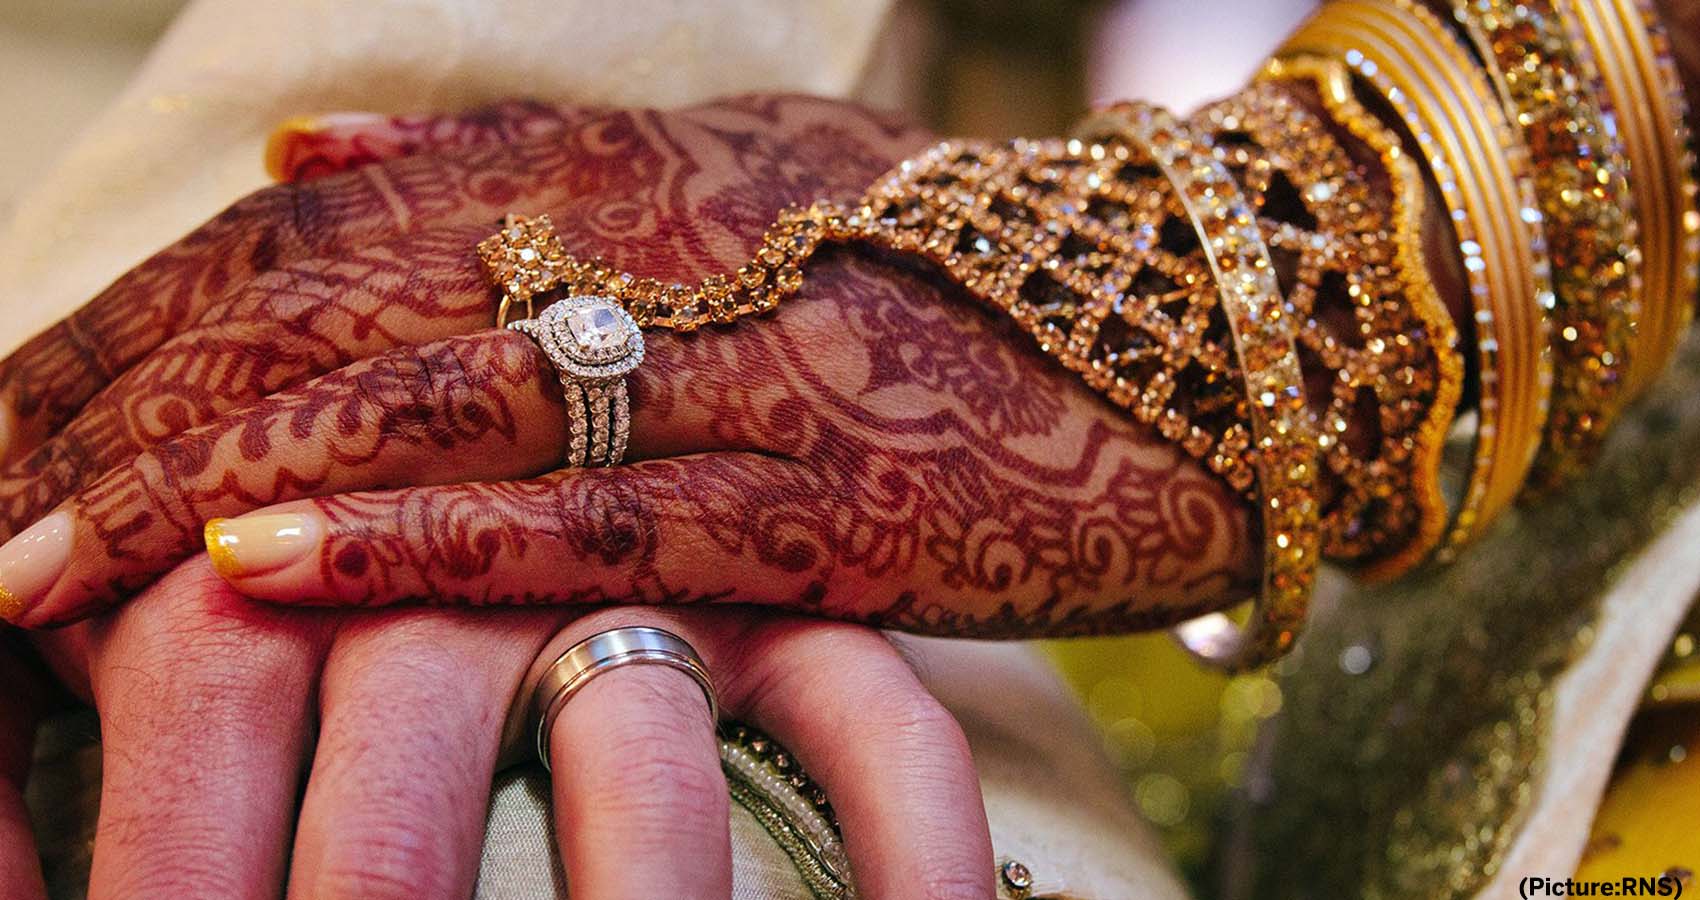 How American Couples’ ‘Inter-Hindu’ Marriages Are Changing The Faith